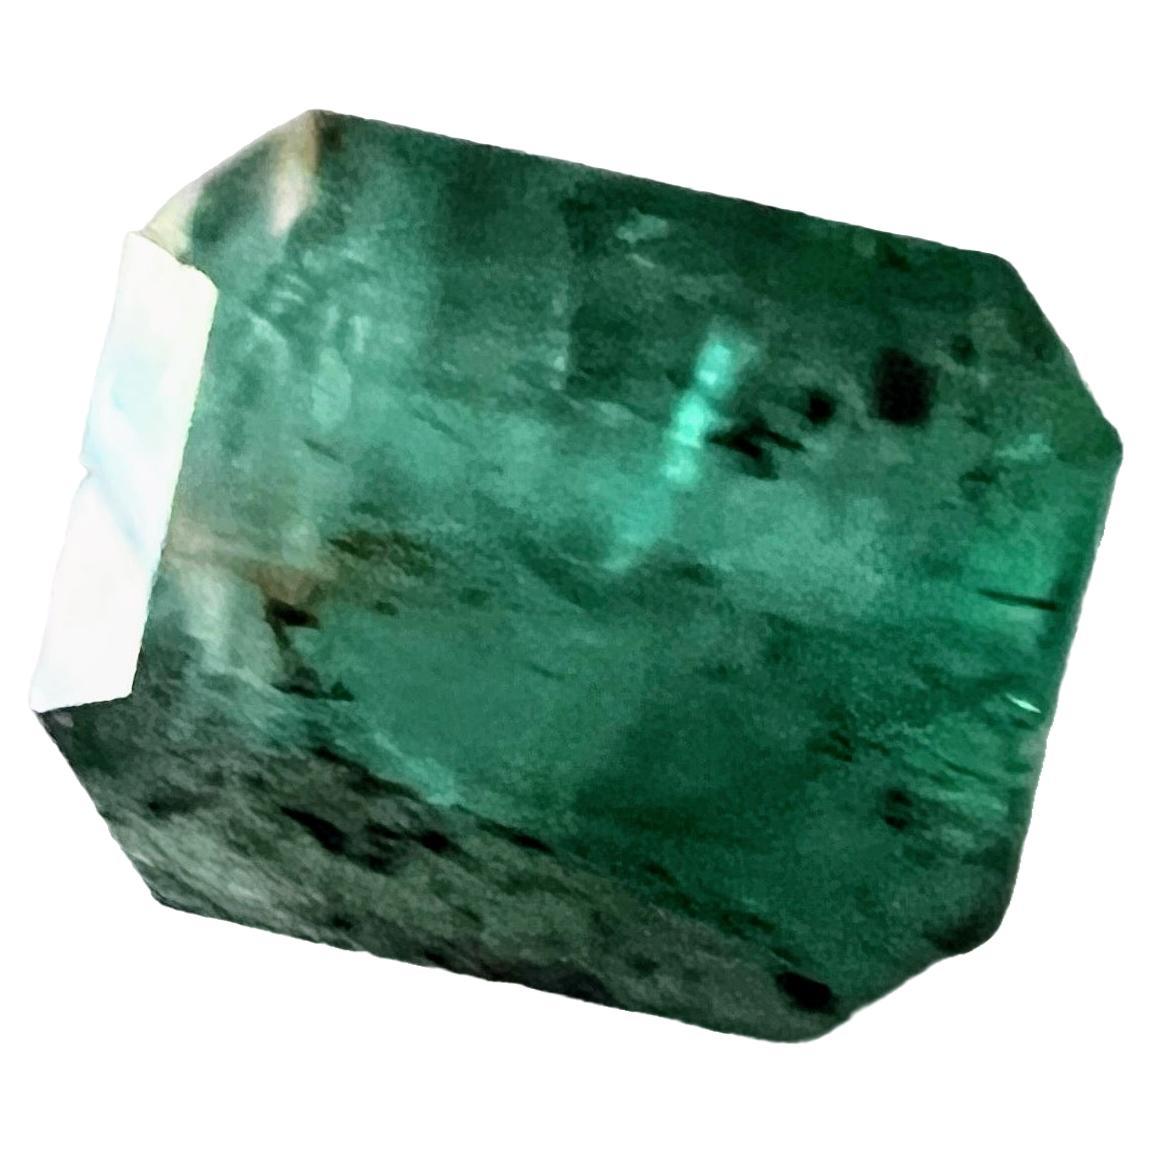 Artisan 7.19ct  NON-OILED Untreated Natural EMERALD Gemstone For Sale